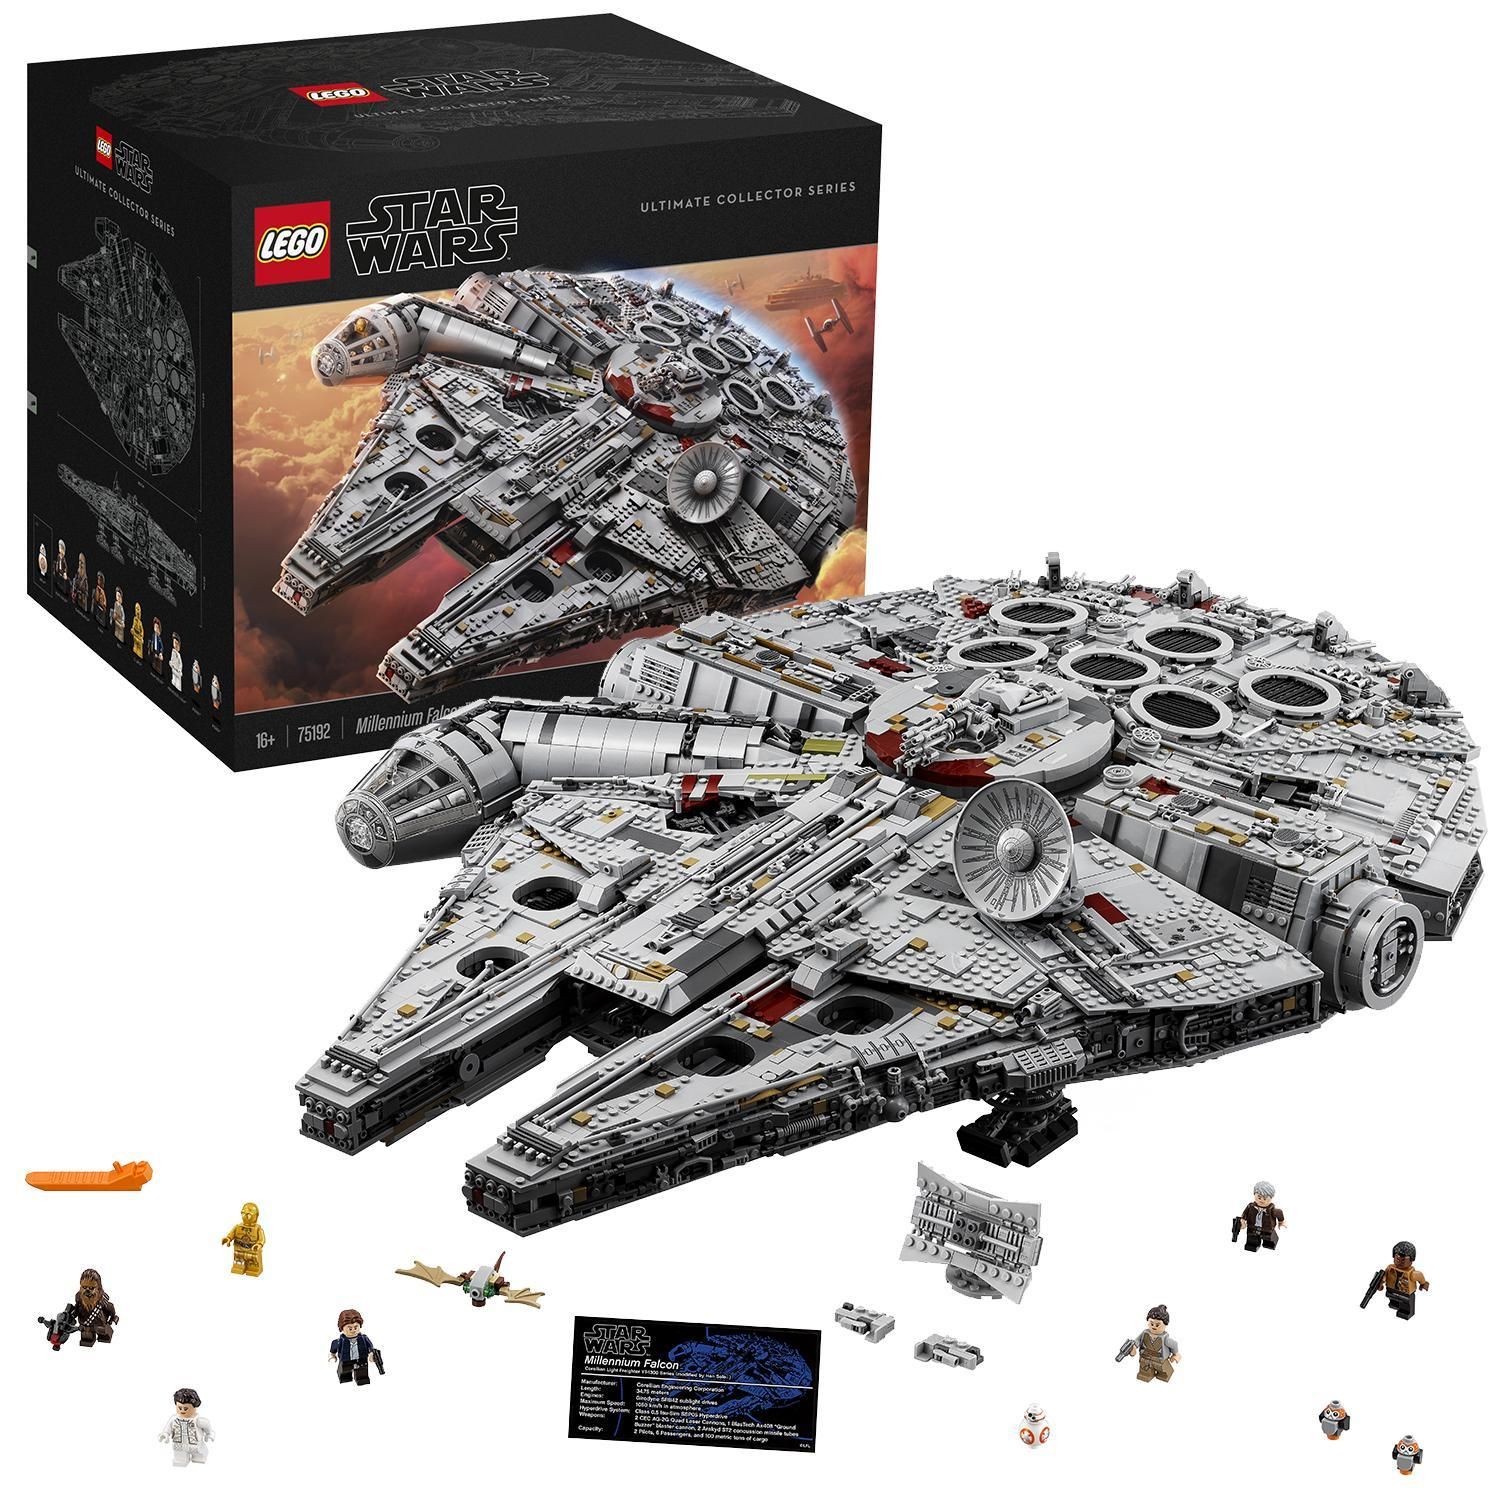 Things I like #1 – Lego Ultimate Collectors Series Millennium Falcon